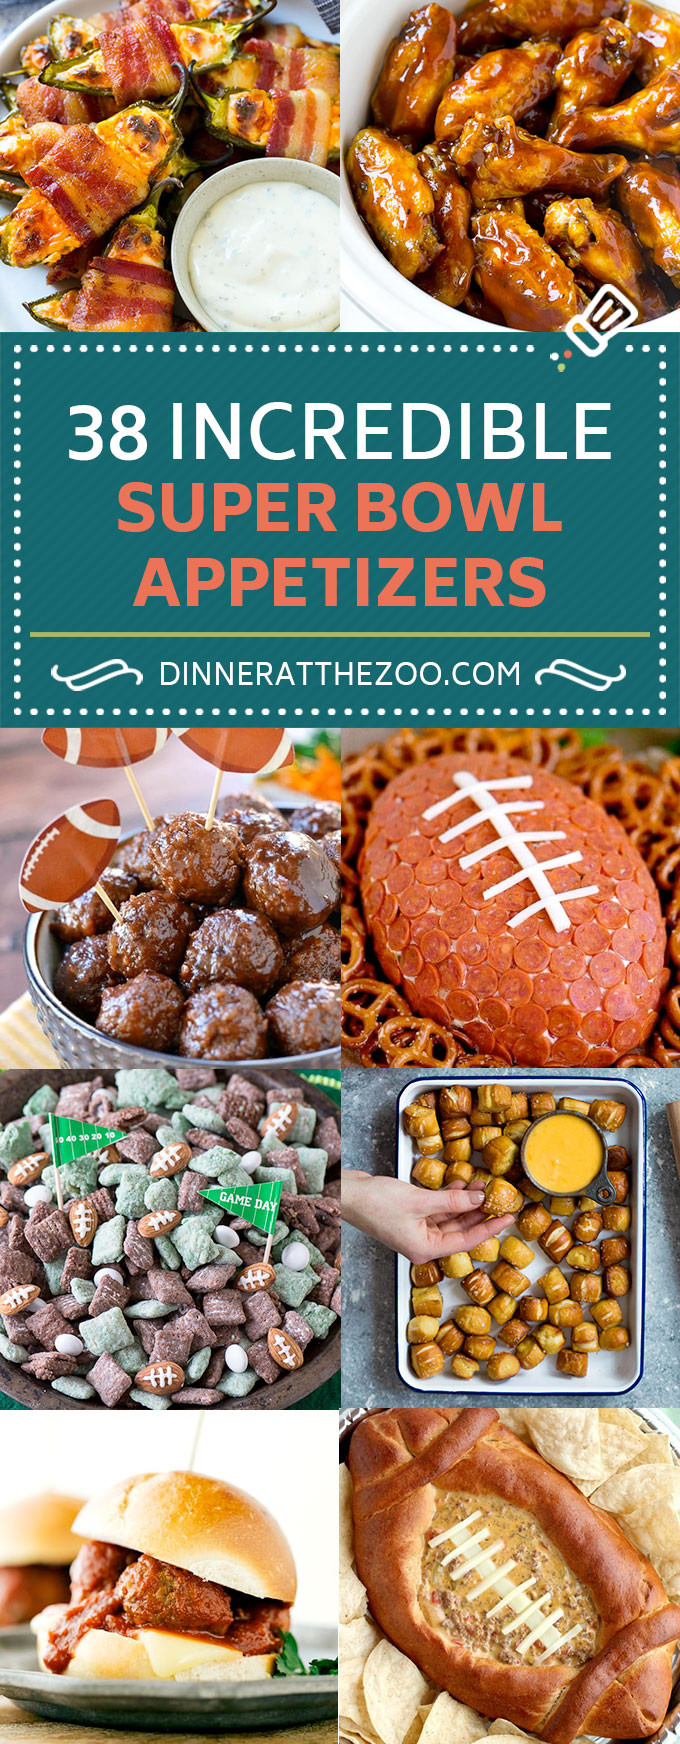 Top Super Bowl Recipes
 45 Incredible Super Bowl Appetizer Recipes Dinner at the Zoo